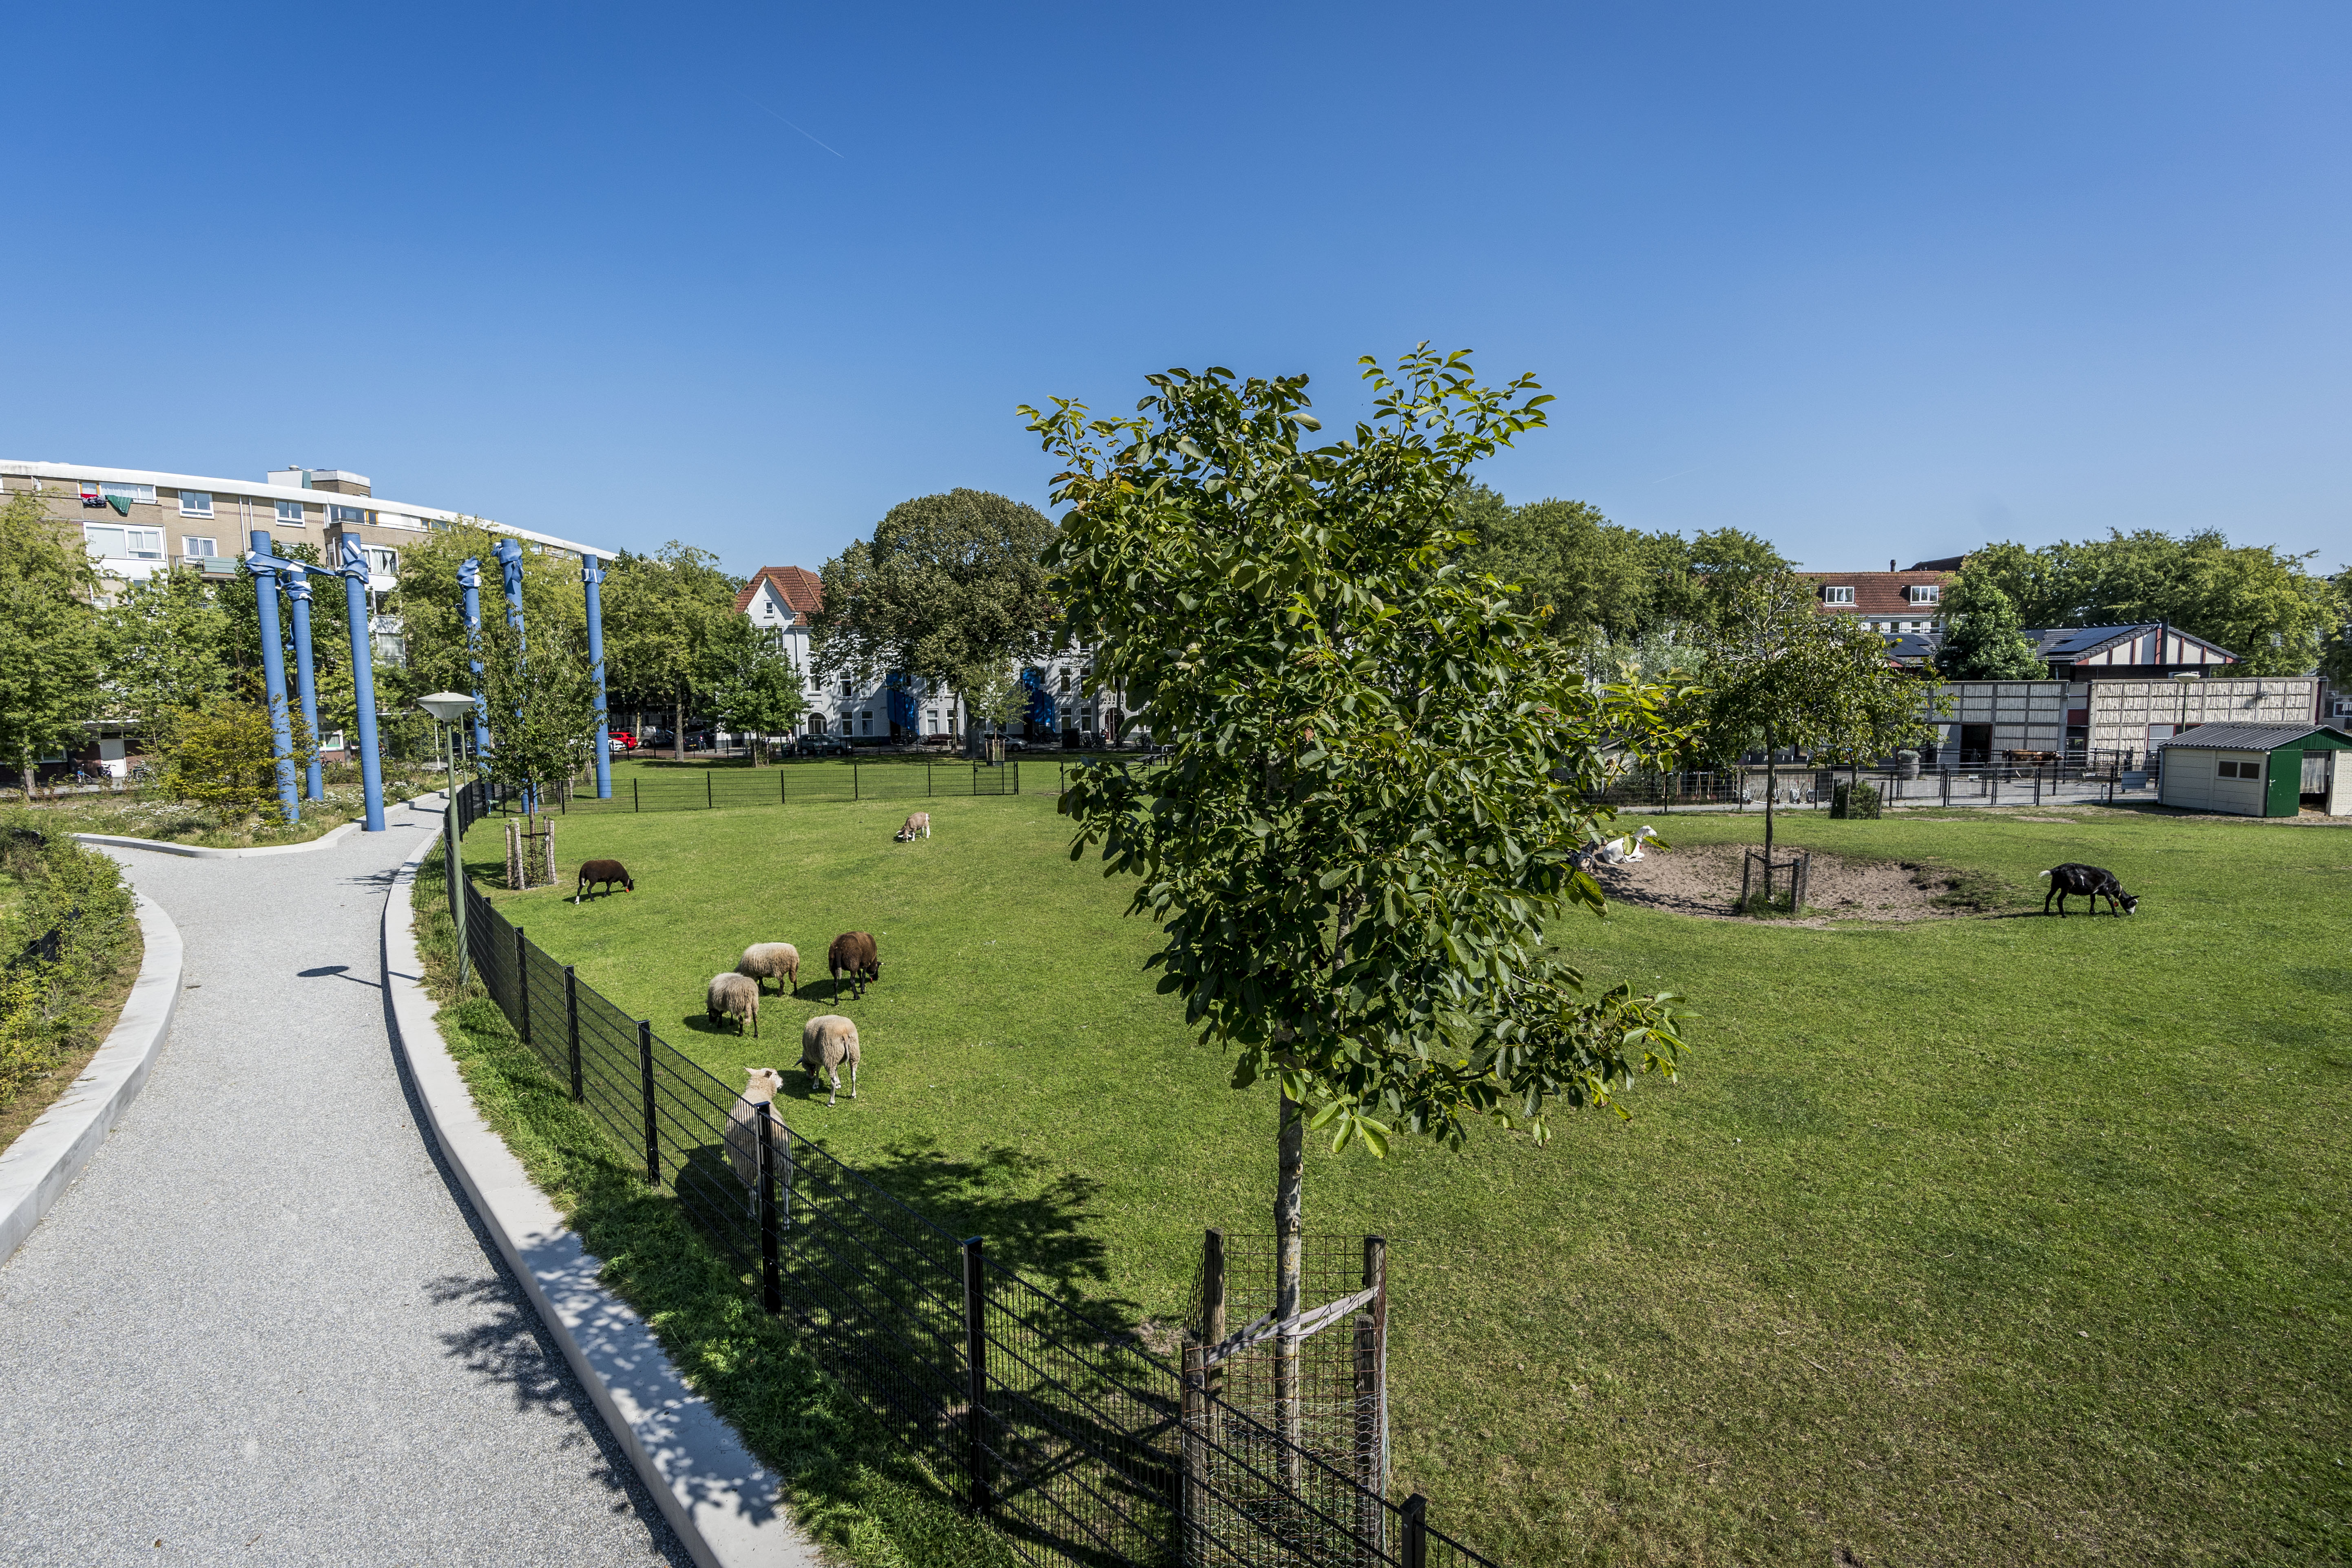 Official opening of the Cromvlietpark and Urban Waterbuffer